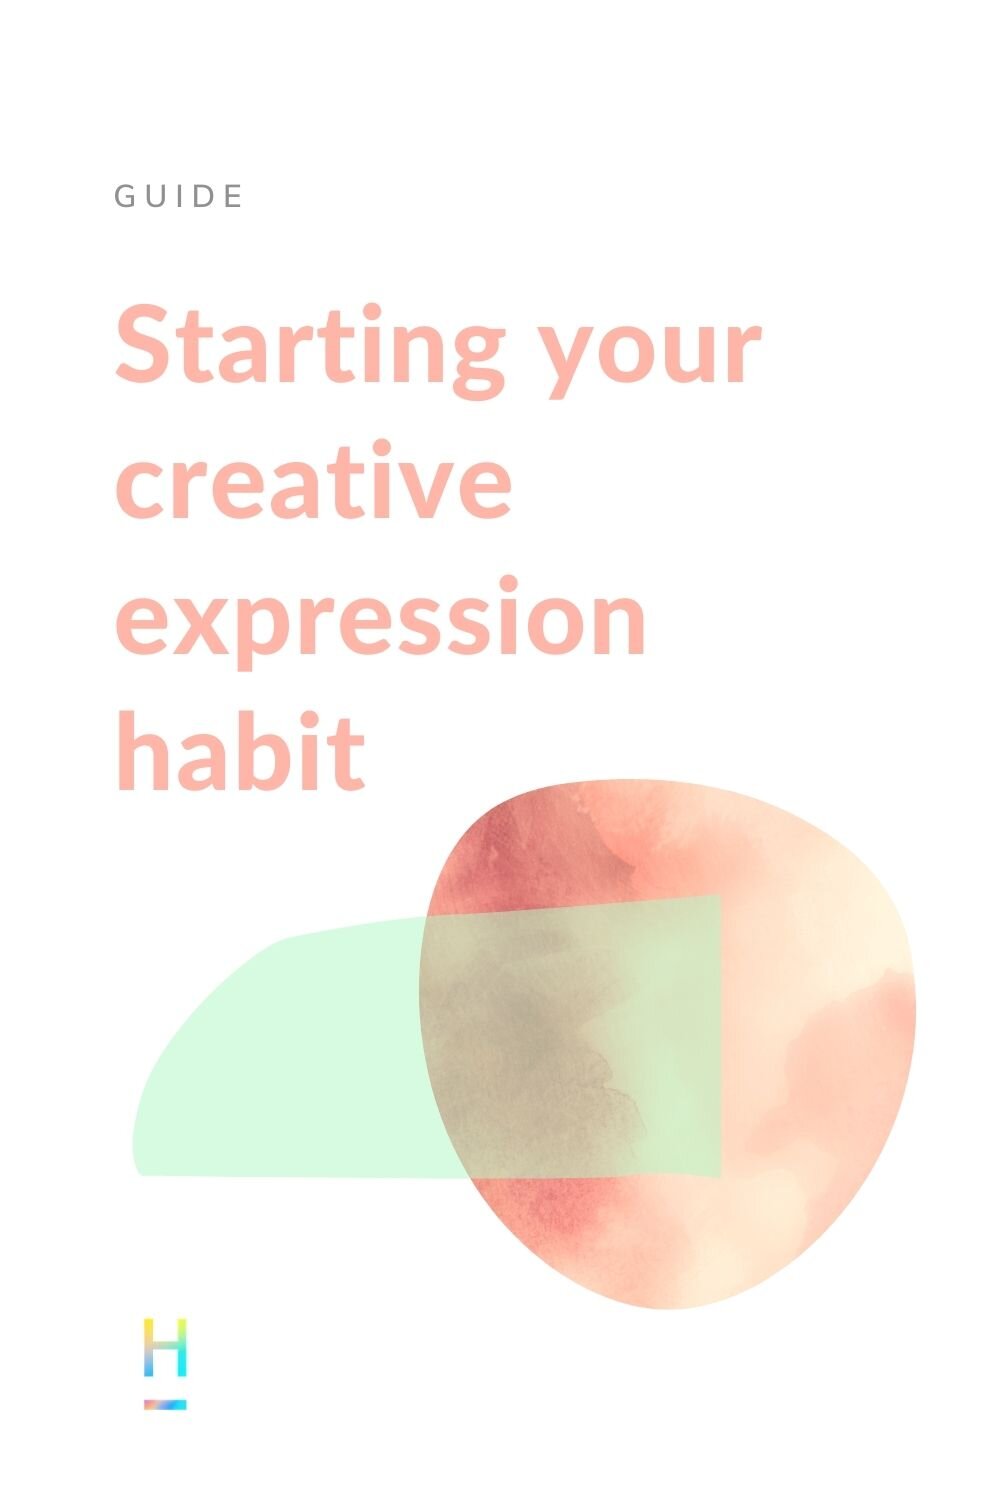 Starting your creative expression habit (Copy) (Copy) (Copy)